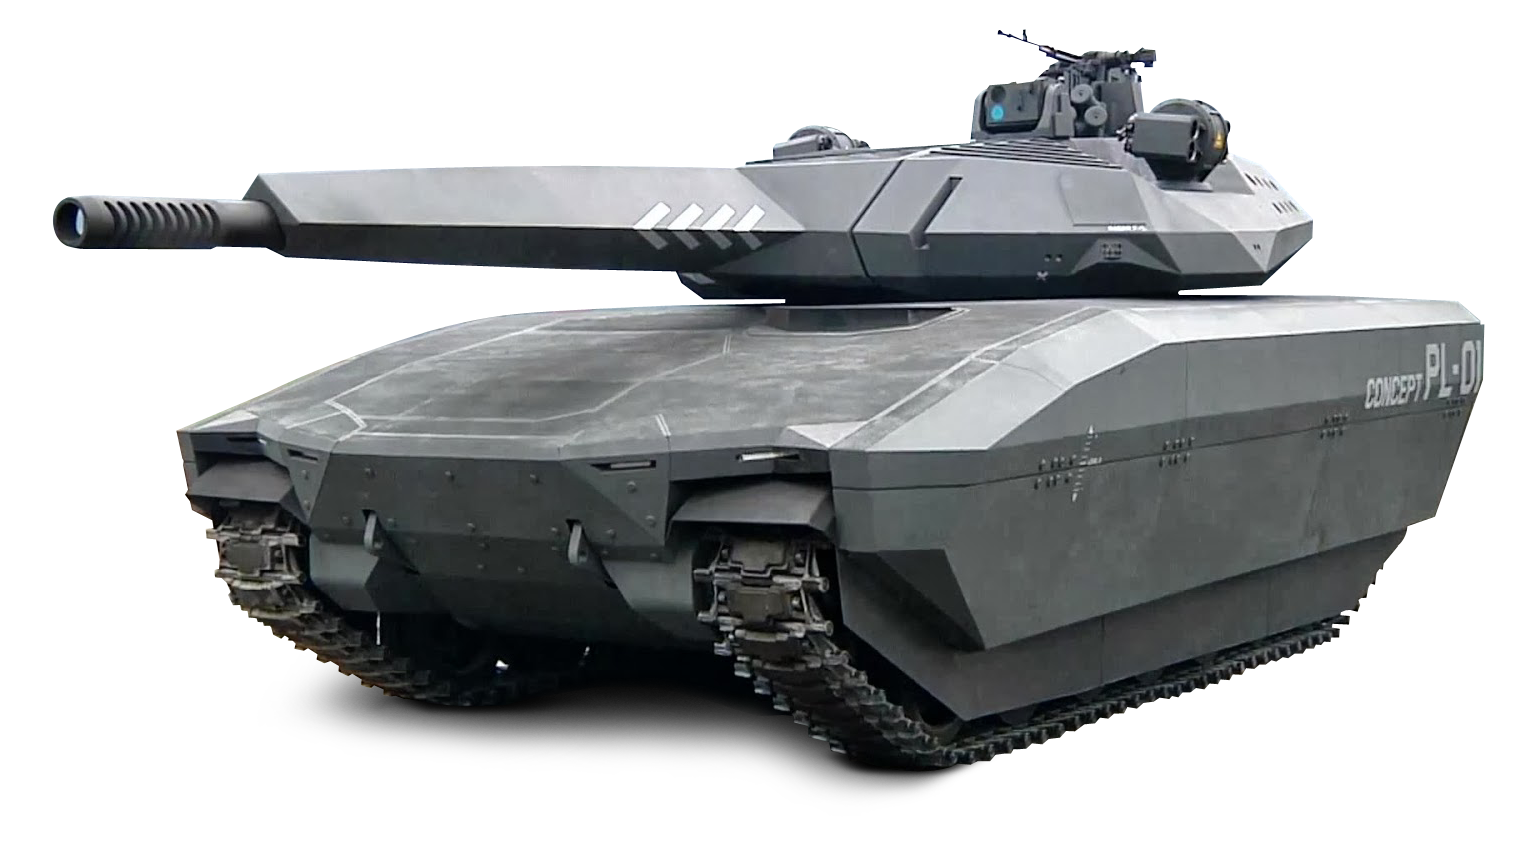 A Grey Tank With A Black Background